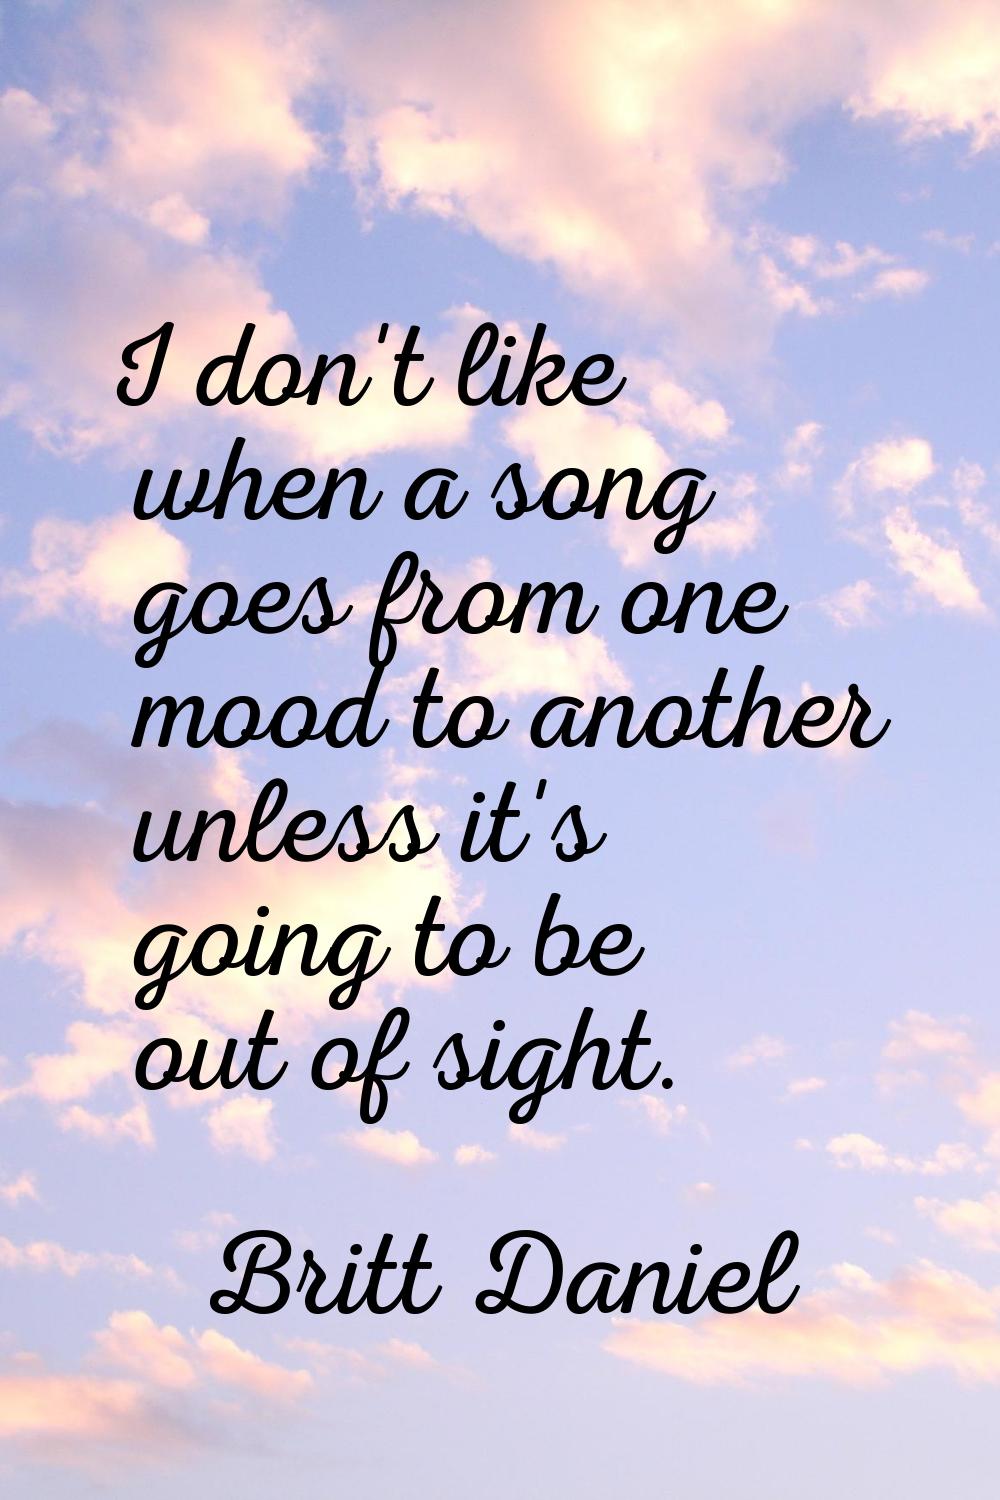 I don't like when a song goes from one mood to another unless it's going to be out of sight.